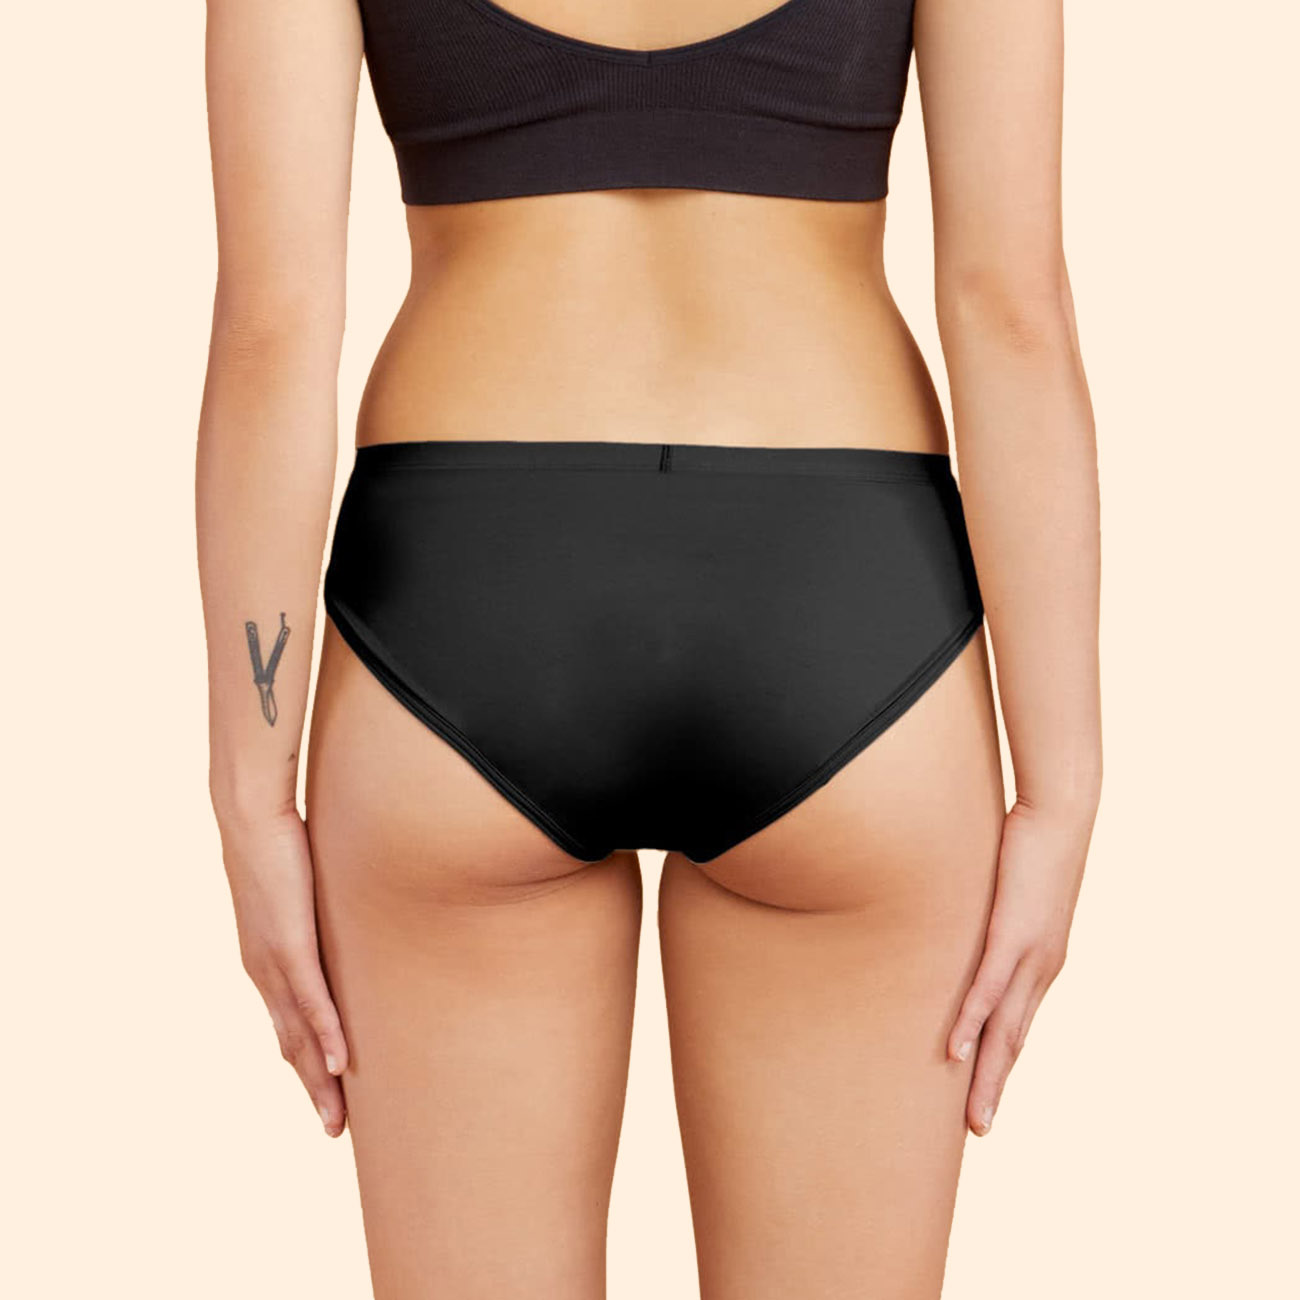 Thinx review and are they worth it? - The Fitnessista